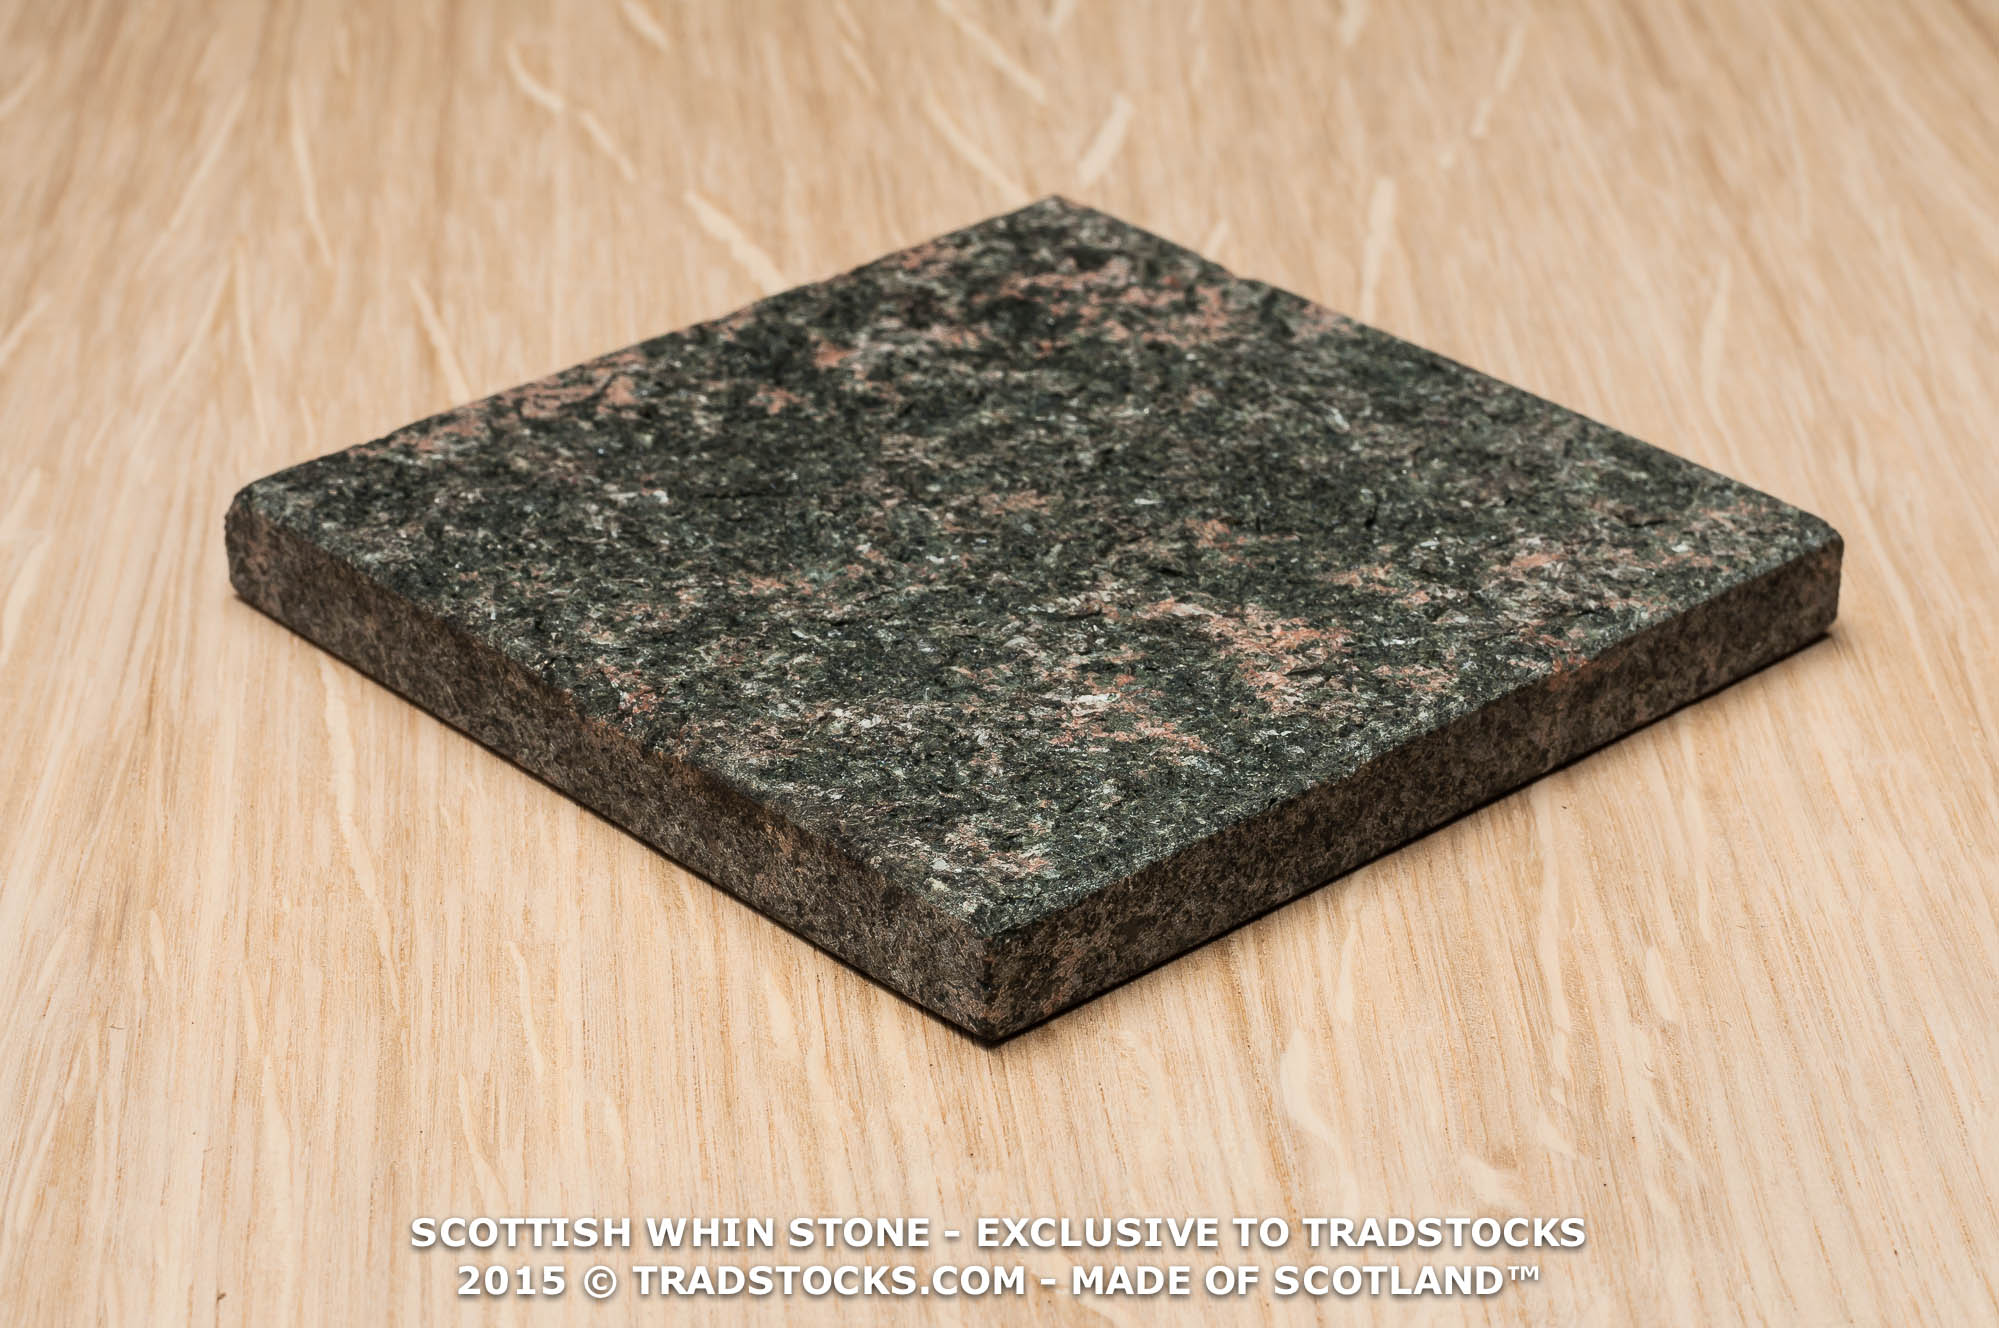 SCOTTISH.WHINSTONE.WHIN.STONE.SUPPLIERS.PROVIDERS.BUY.SAMPLES.BUILDING.MASONRY.QUARRY.QUARRIES.DIRECT.ONLINE.PRICE.COST.HOW.MUCH.TRADSTOCKS.STIRLING.CENTRAL.SCOTLAND.NATURAL.SANDSTONE.TRADITIONAL-4824.jpg